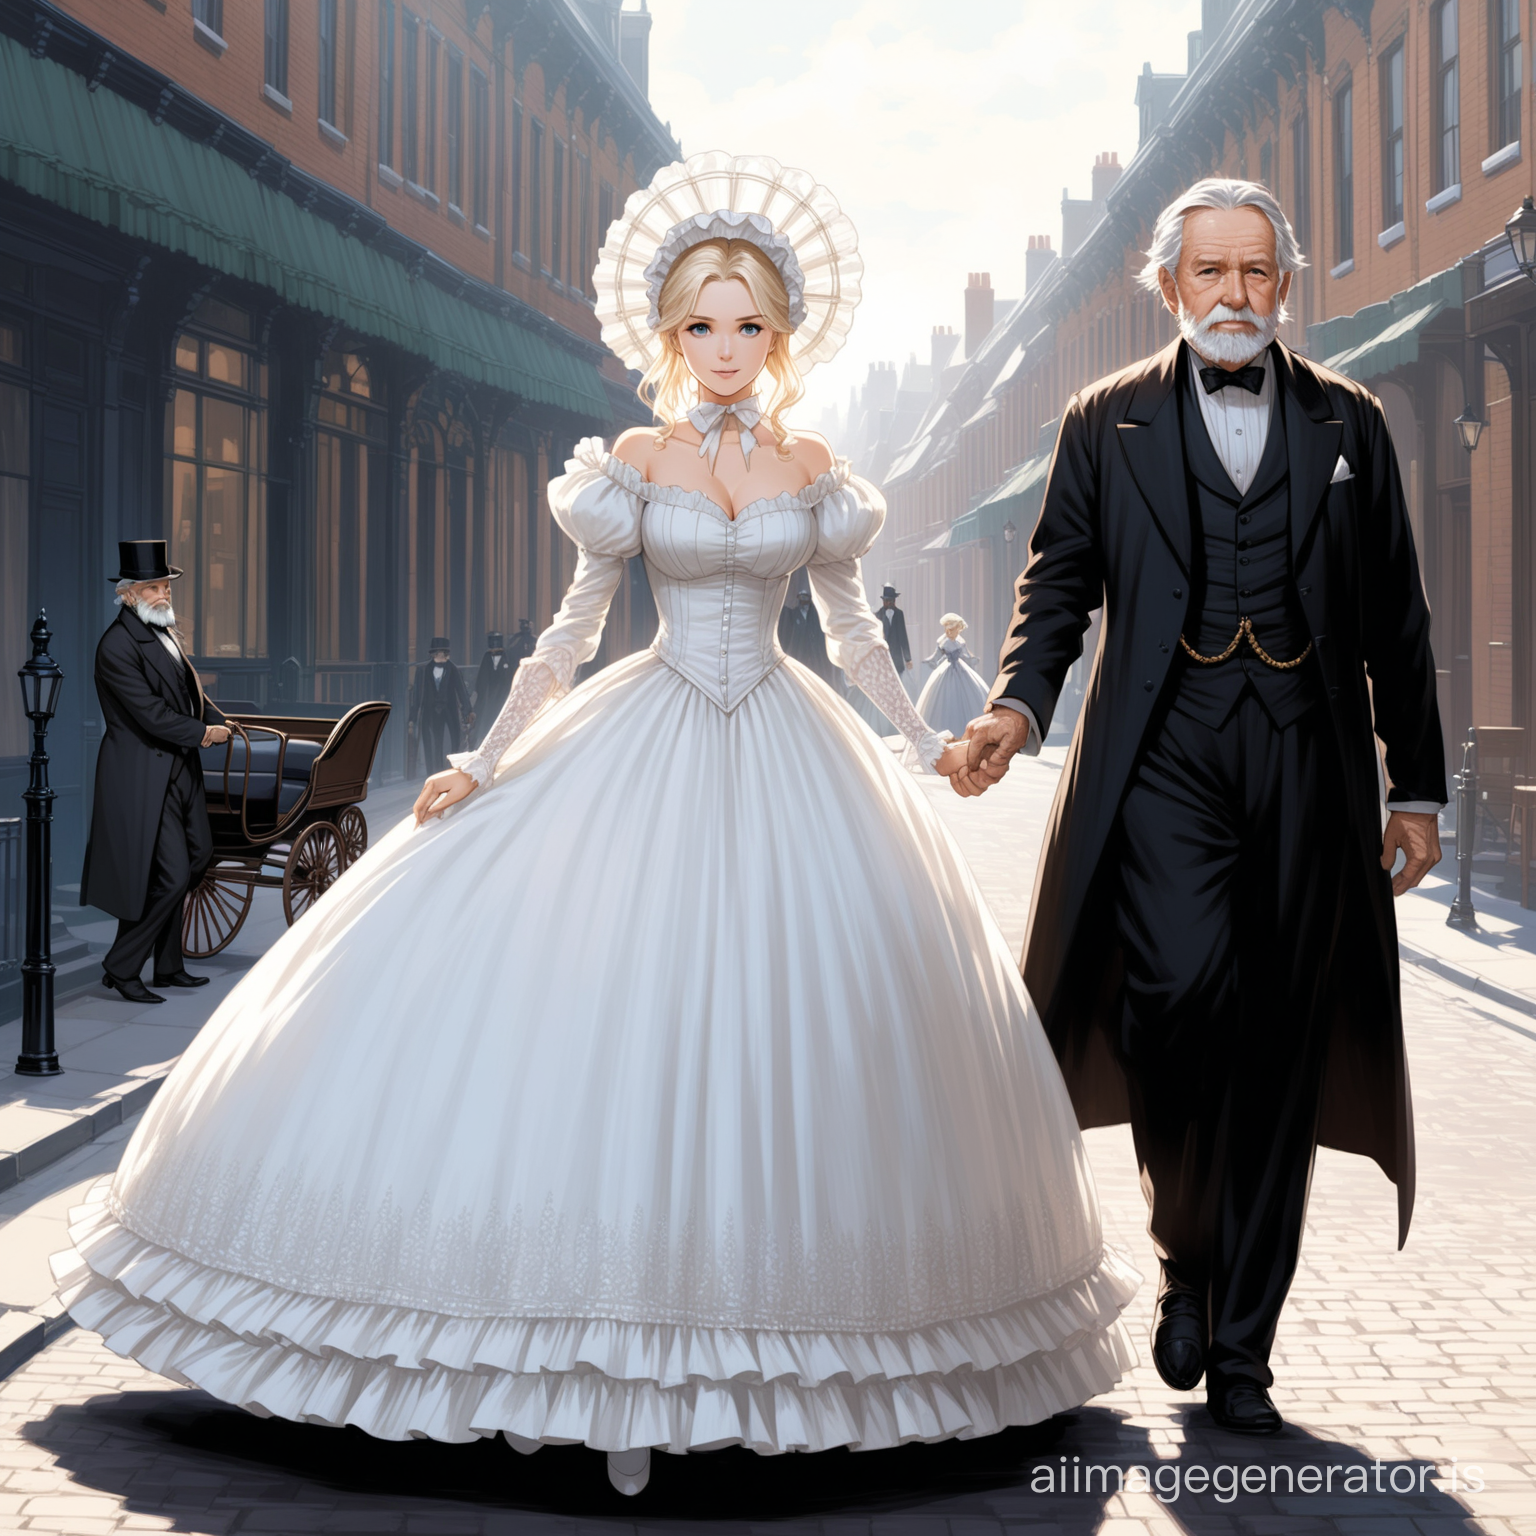 Susan Storm from the FF4 wearing a black floor-length loose billowing 1860 Victorian crinoline poofy dress with a frilly bonnet walking on a Victorian era street with an old man dressed into a black Victorian suit who seems to be her newlywed husband